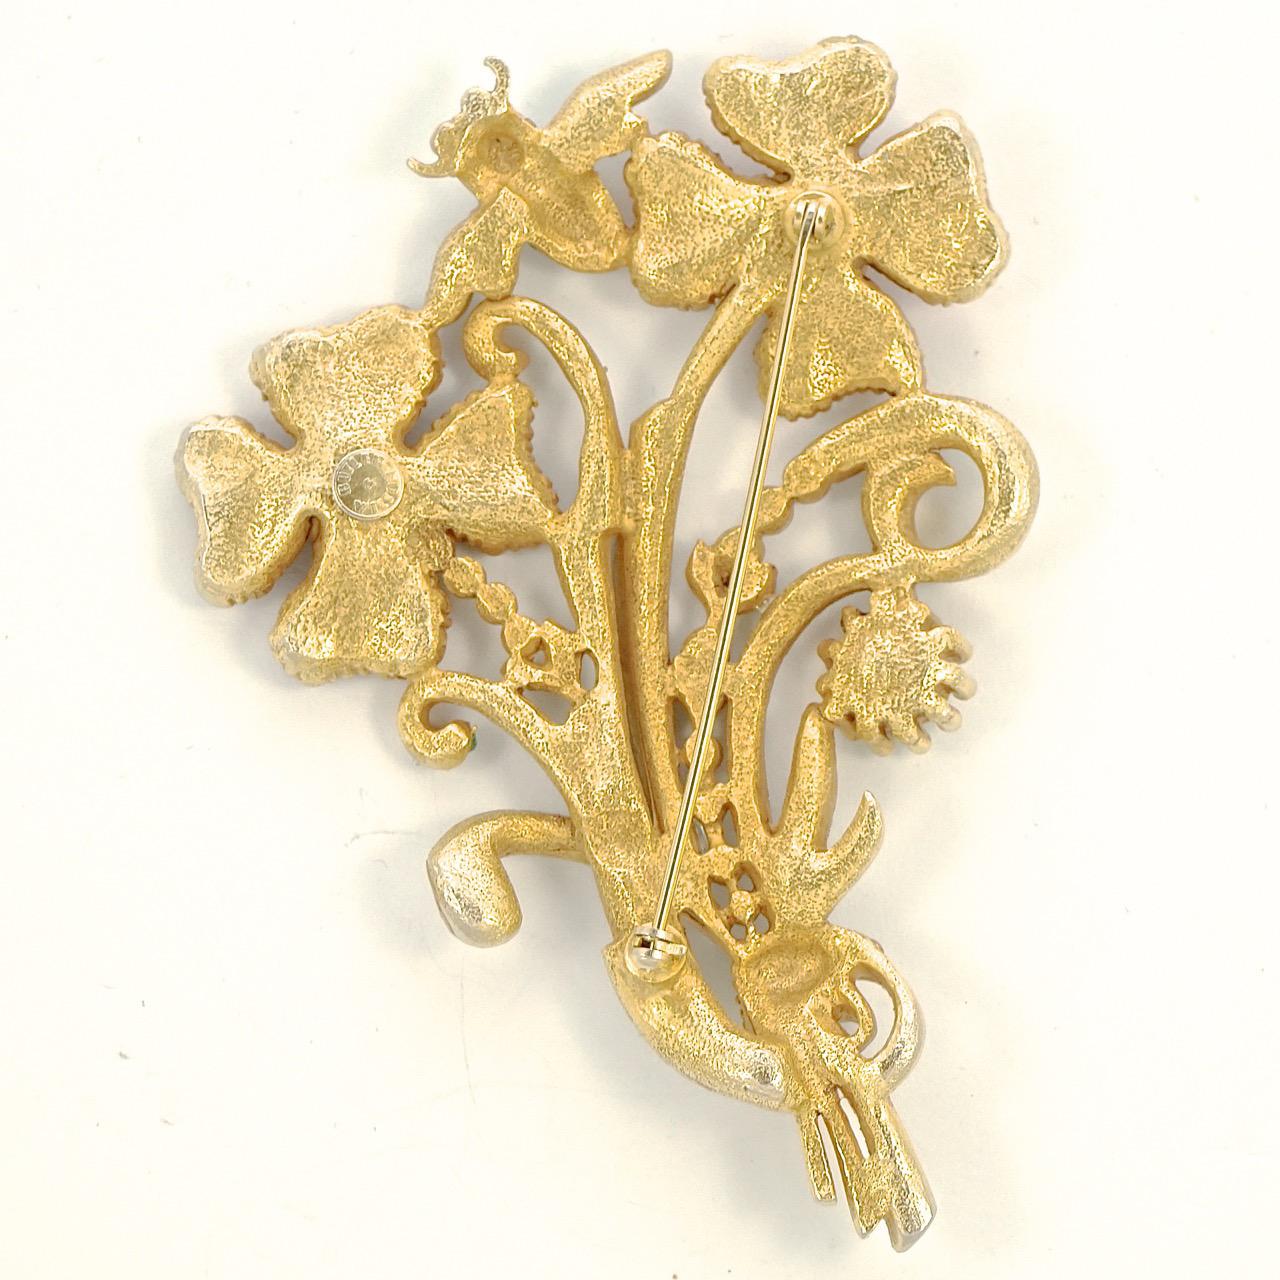 Women's or Men's Butler & Wilson Gold Tone Flower Brooch and Earrings with Crystals